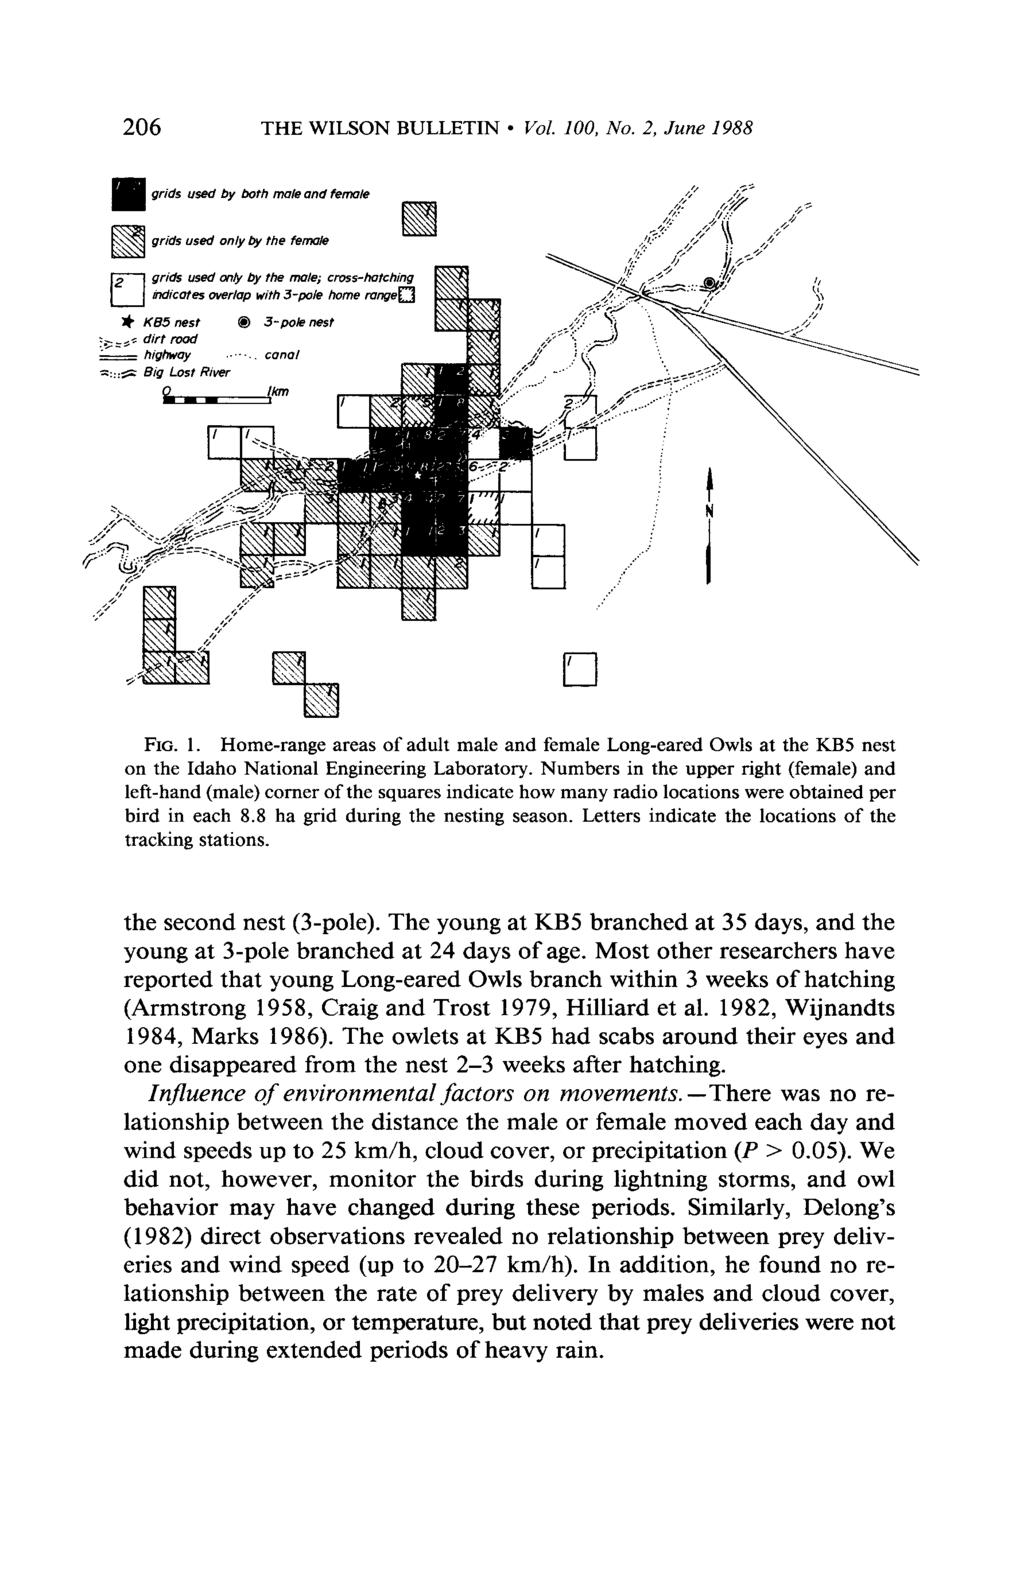 206 THE WILSON BULLETIN l Vol. 100, No. 2, June 1988 grids used by both male o"d fern/e -_ hlghuay..... cone, =:::s 6 jg Lost Rwer FIG. 1. Home-range areas of adult male and female Long-eared Owls at the KB5 nest on the Idaho National Engineering Laboratory.